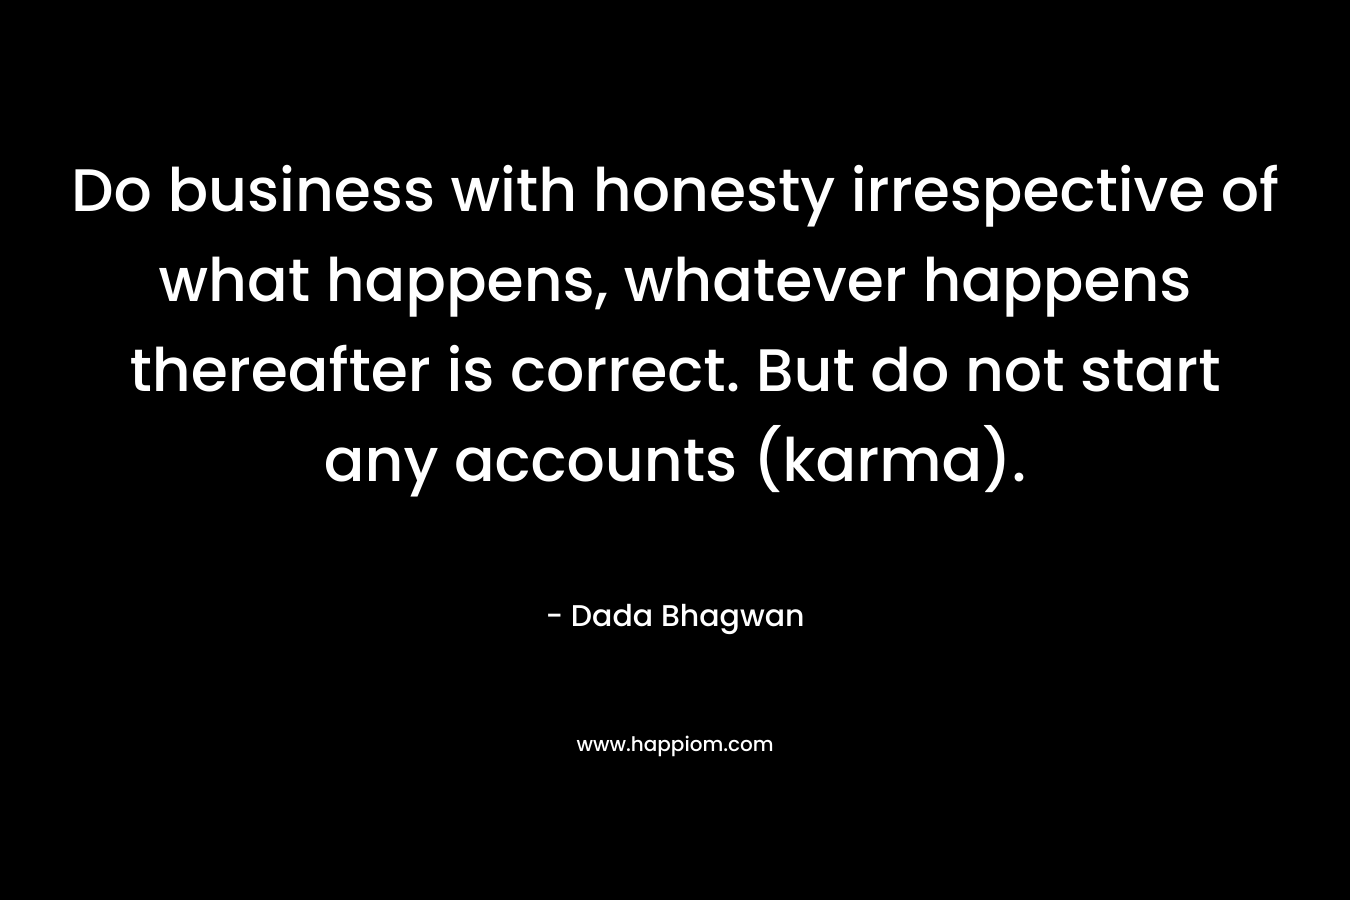 Do business with honesty irrespective of what happens, whatever happens thereafter is correct. But do not start any accounts (karma).